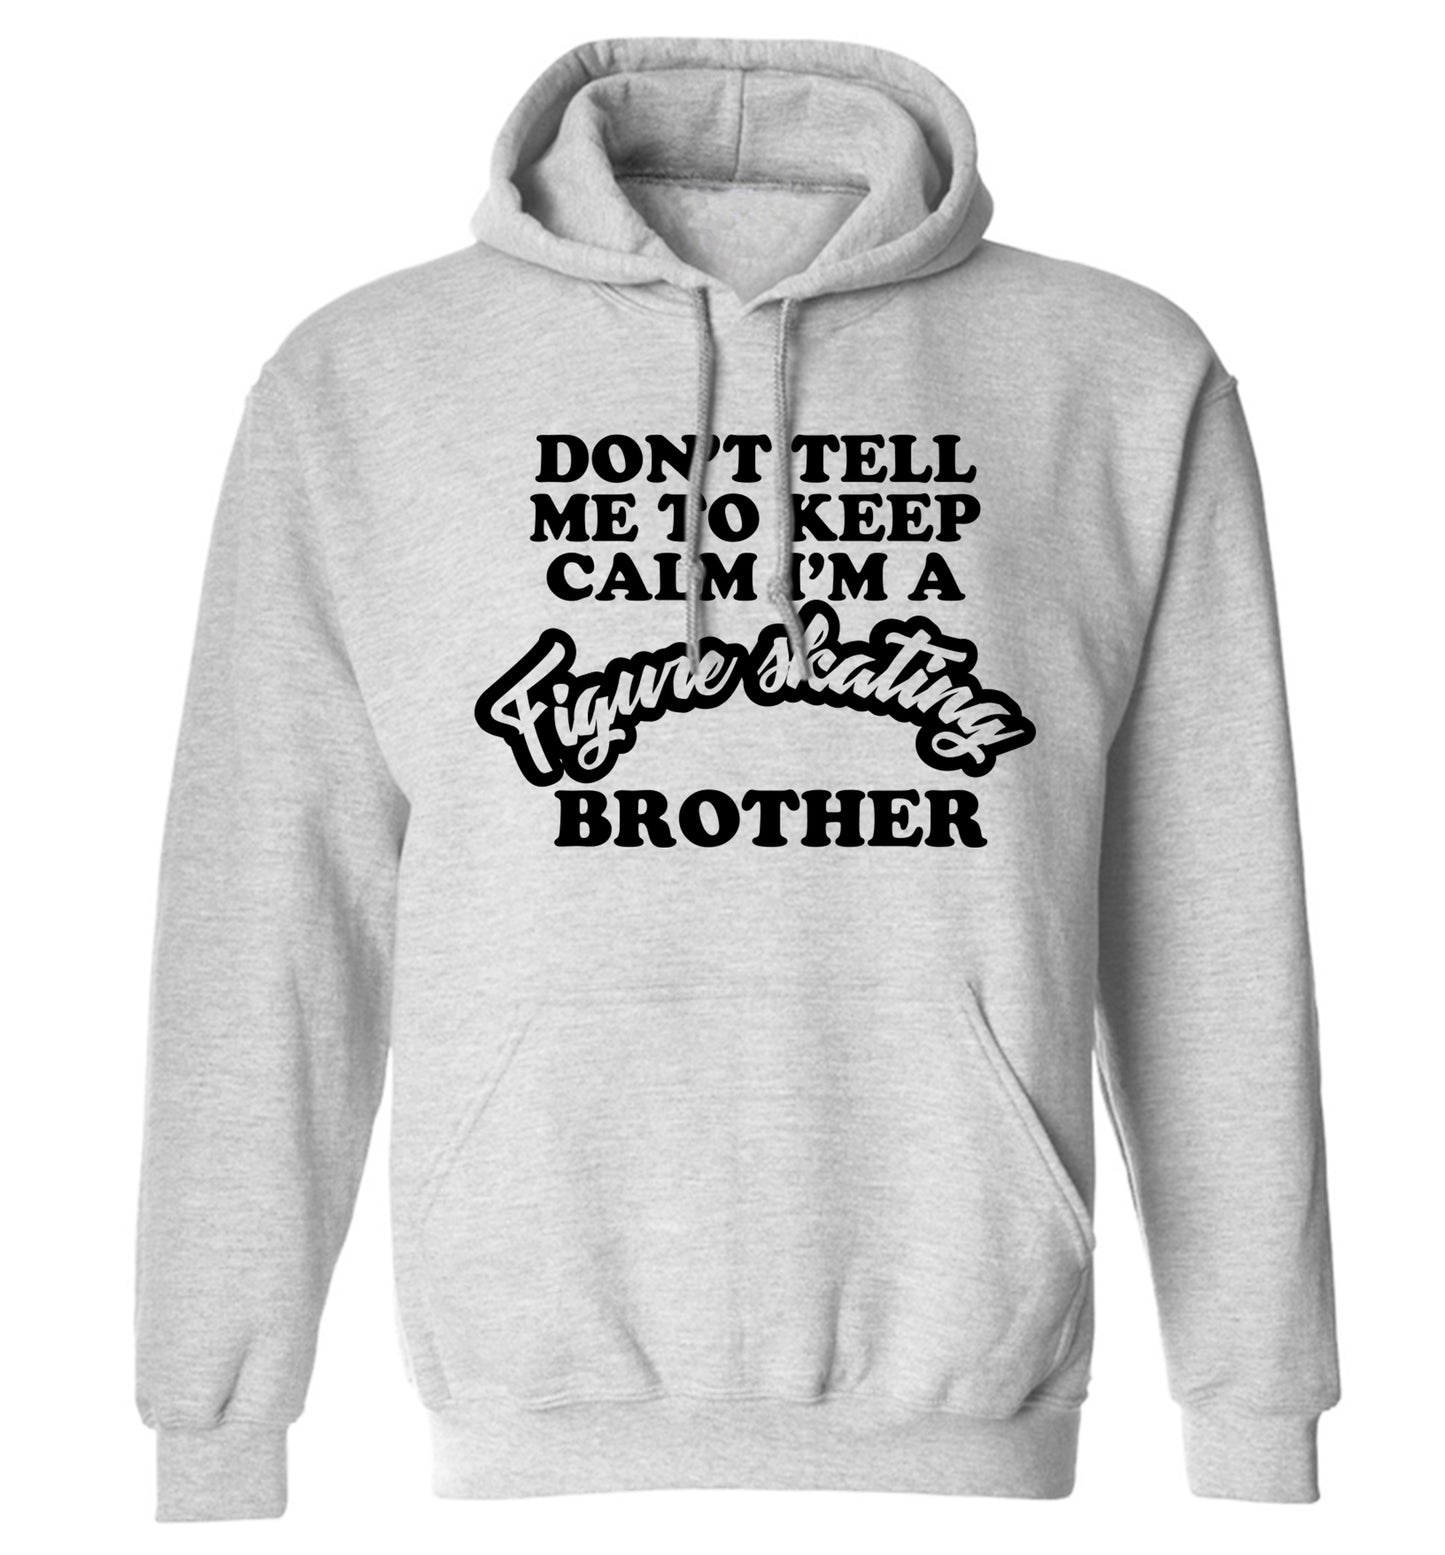 Don't tell me to keep calm I'm a figure skating brother adults unisexgrey hoodie 2XL